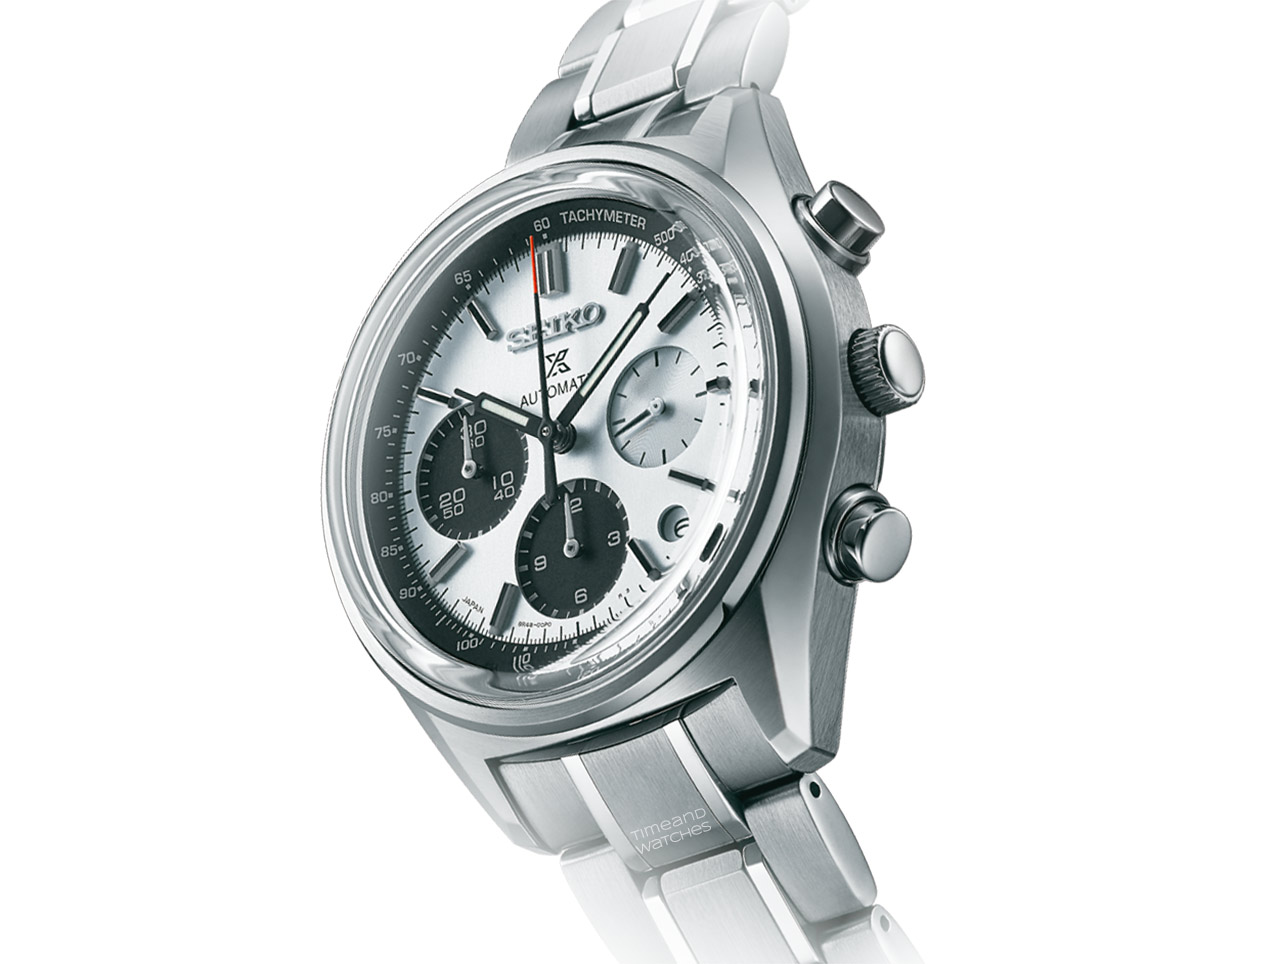 Seiko - Prospex Automatic Chronograph 50th Anniversary Limited Edition  SRQ029J1 | Time and Watches | The watch blog